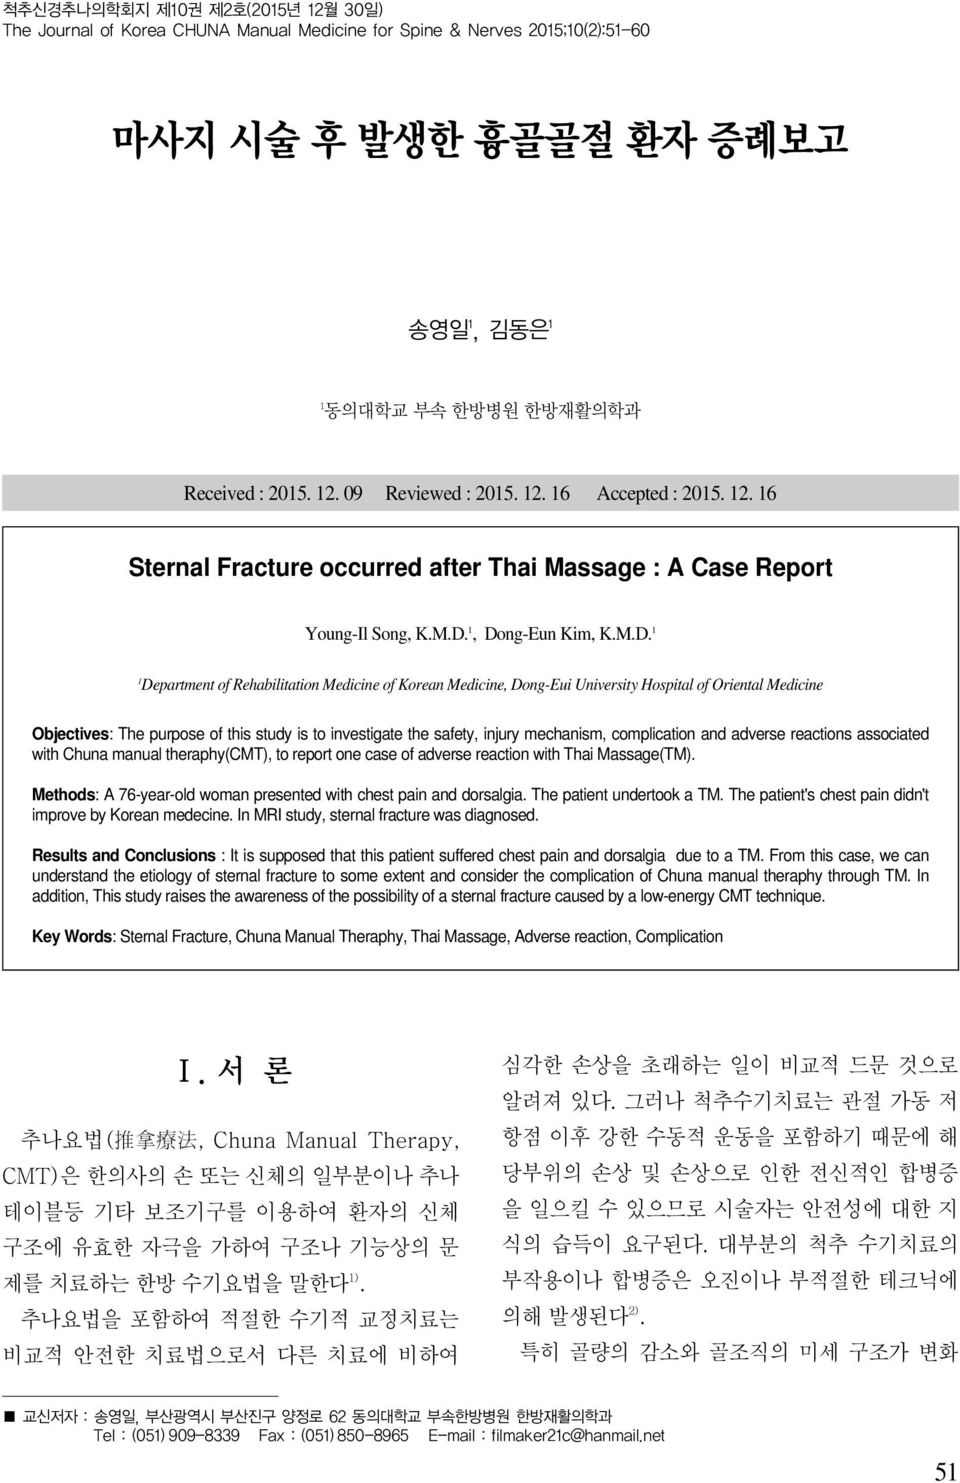 safety, injury mechanism, complication and adverse reactions associated with Chuna manual theraphy(cmt), to report one case of adverse reaction with Thai Massage(TM).